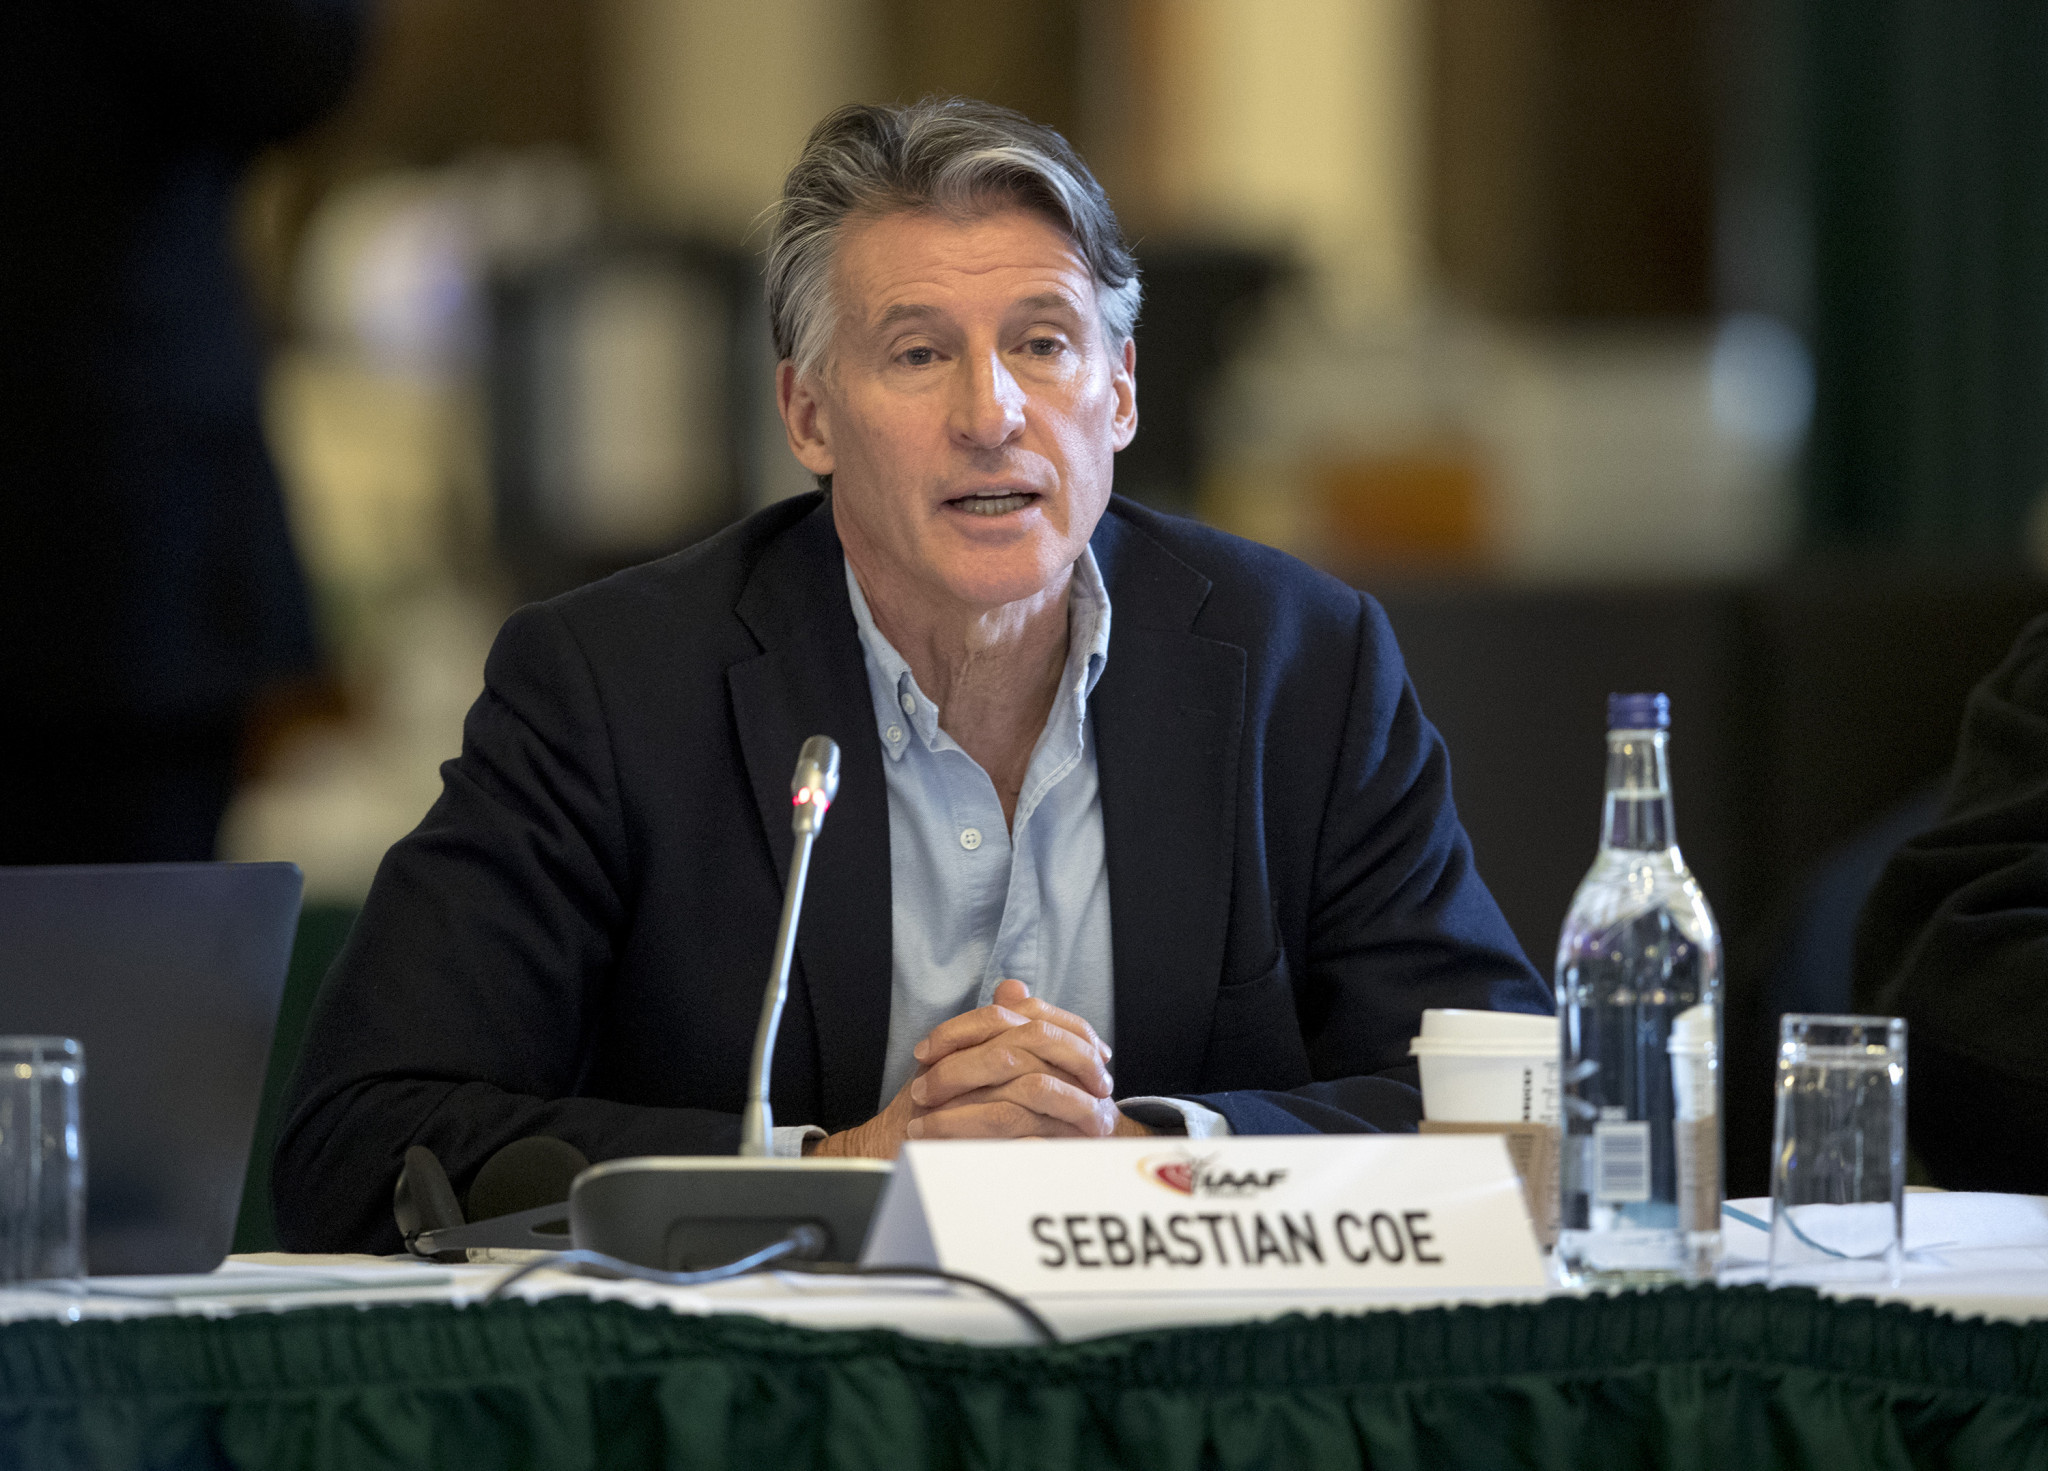 IAAF President Sebastian Coe stated the governing body needed to ensure a level playing field for athletes ©Getty Images